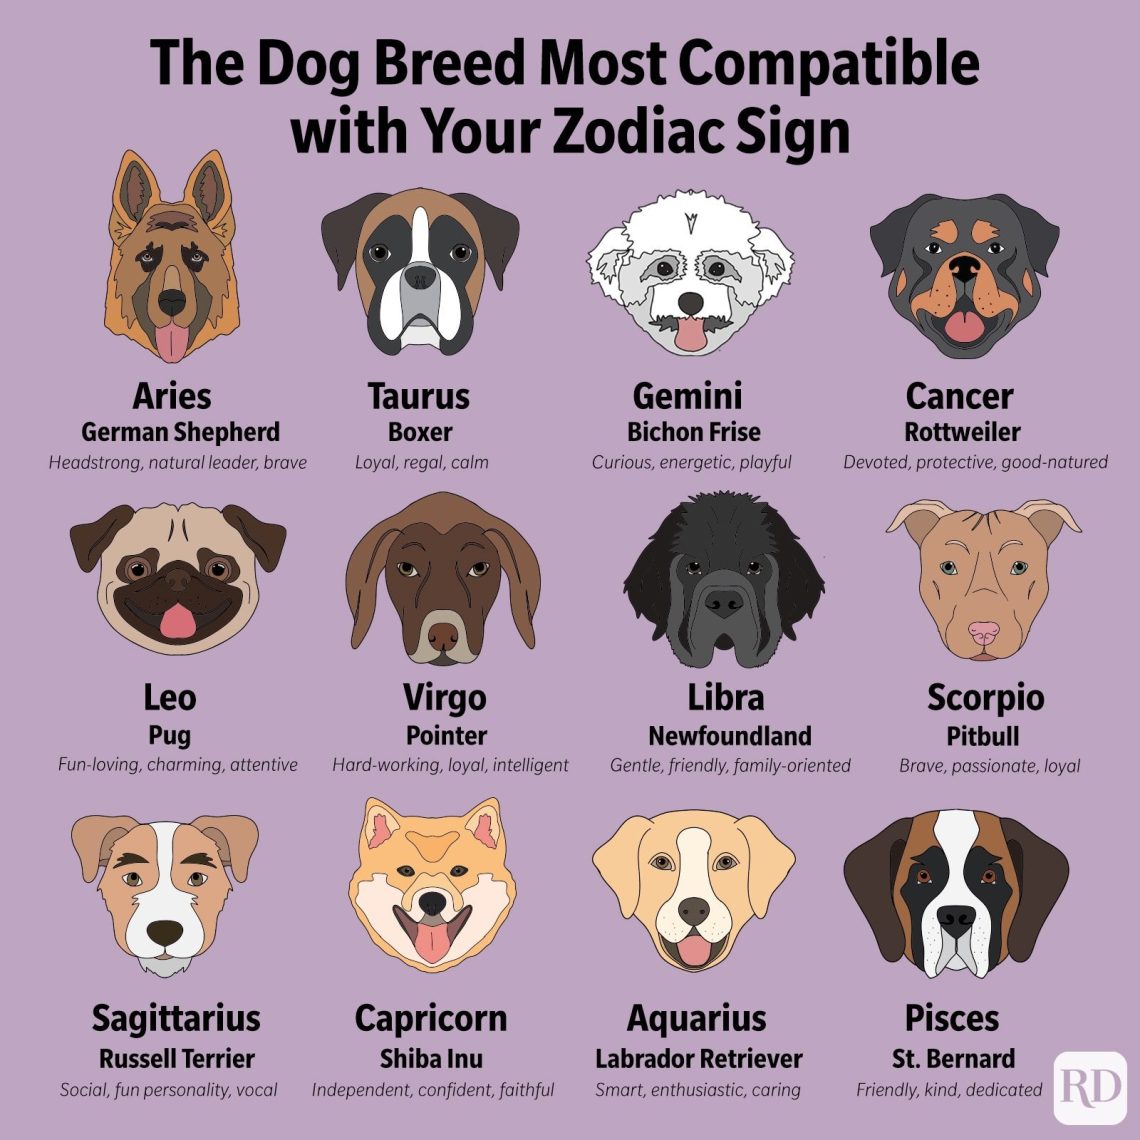 Which dog suits your zodiac sign?